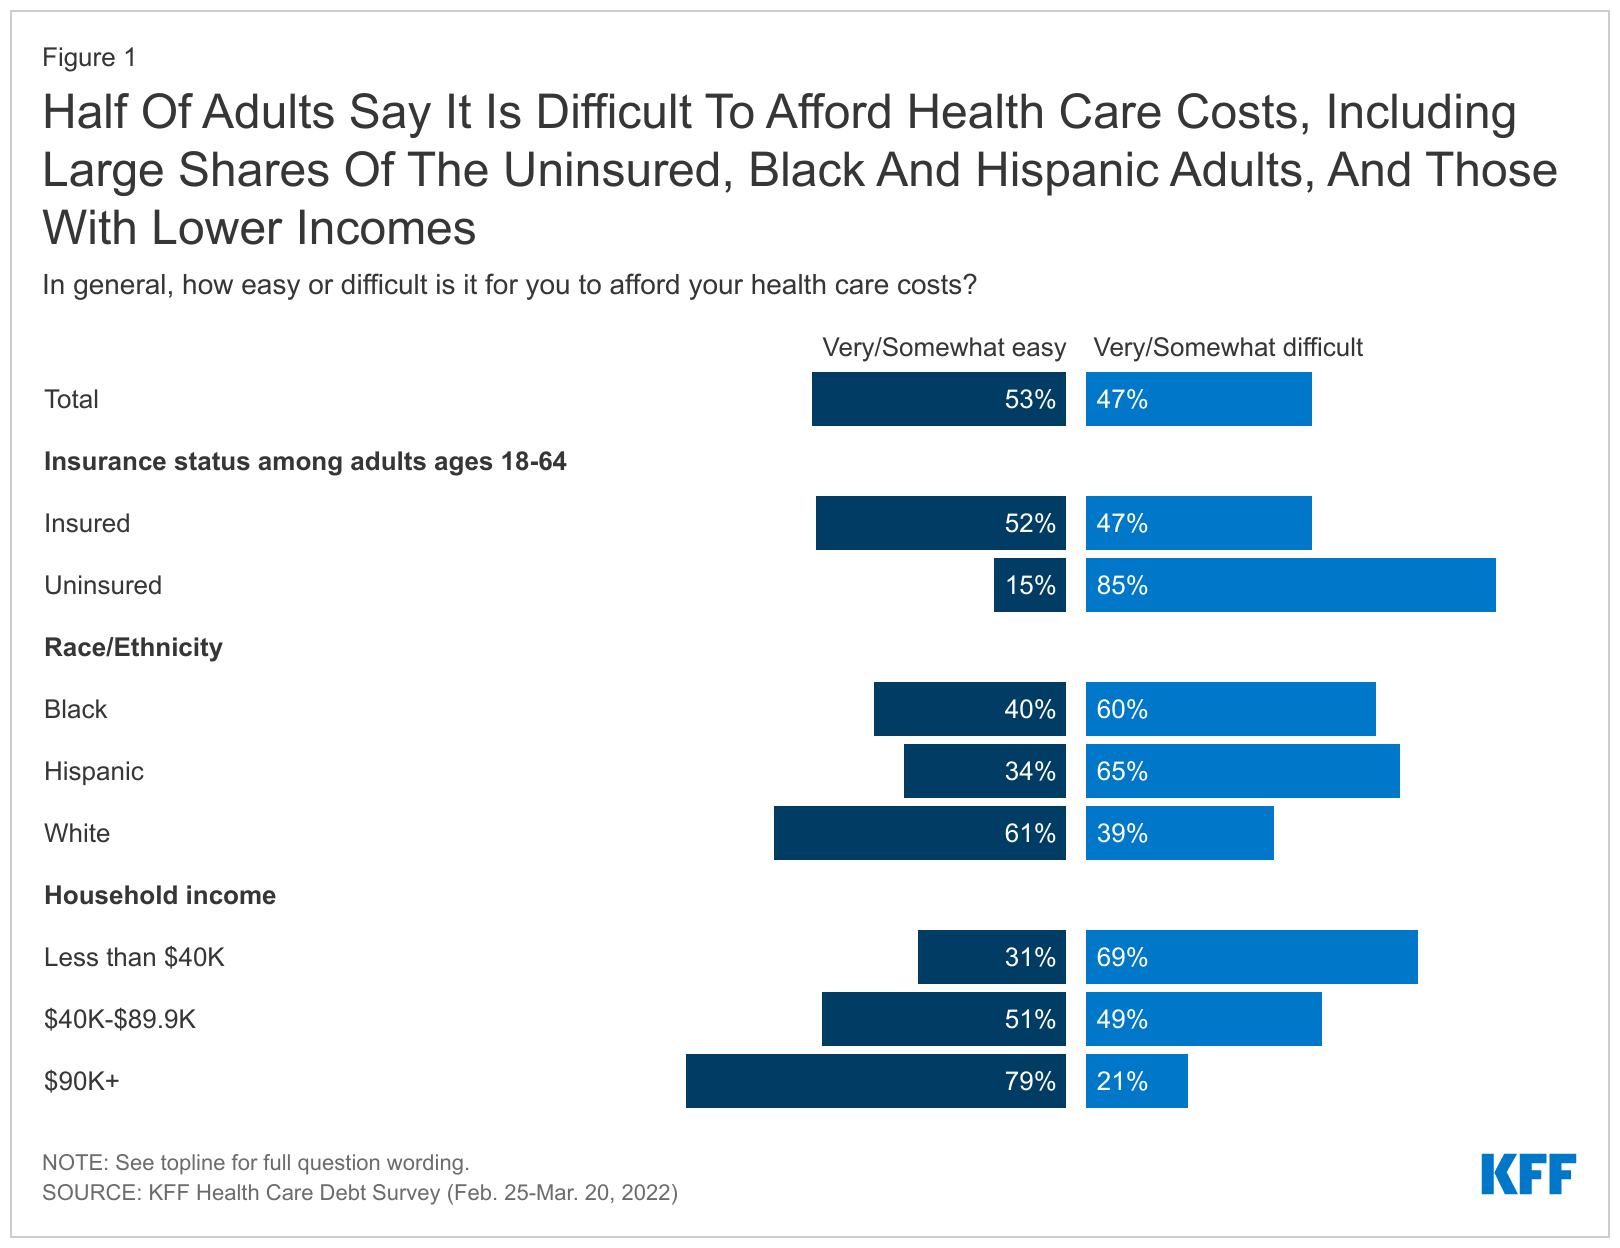 1half-of-adults-say-it-is-difficult-to-afford-health-care-costs-including-large-shares-of-the-uninsured-black-and-hispanic-adults-and-those-with-lower-incomes